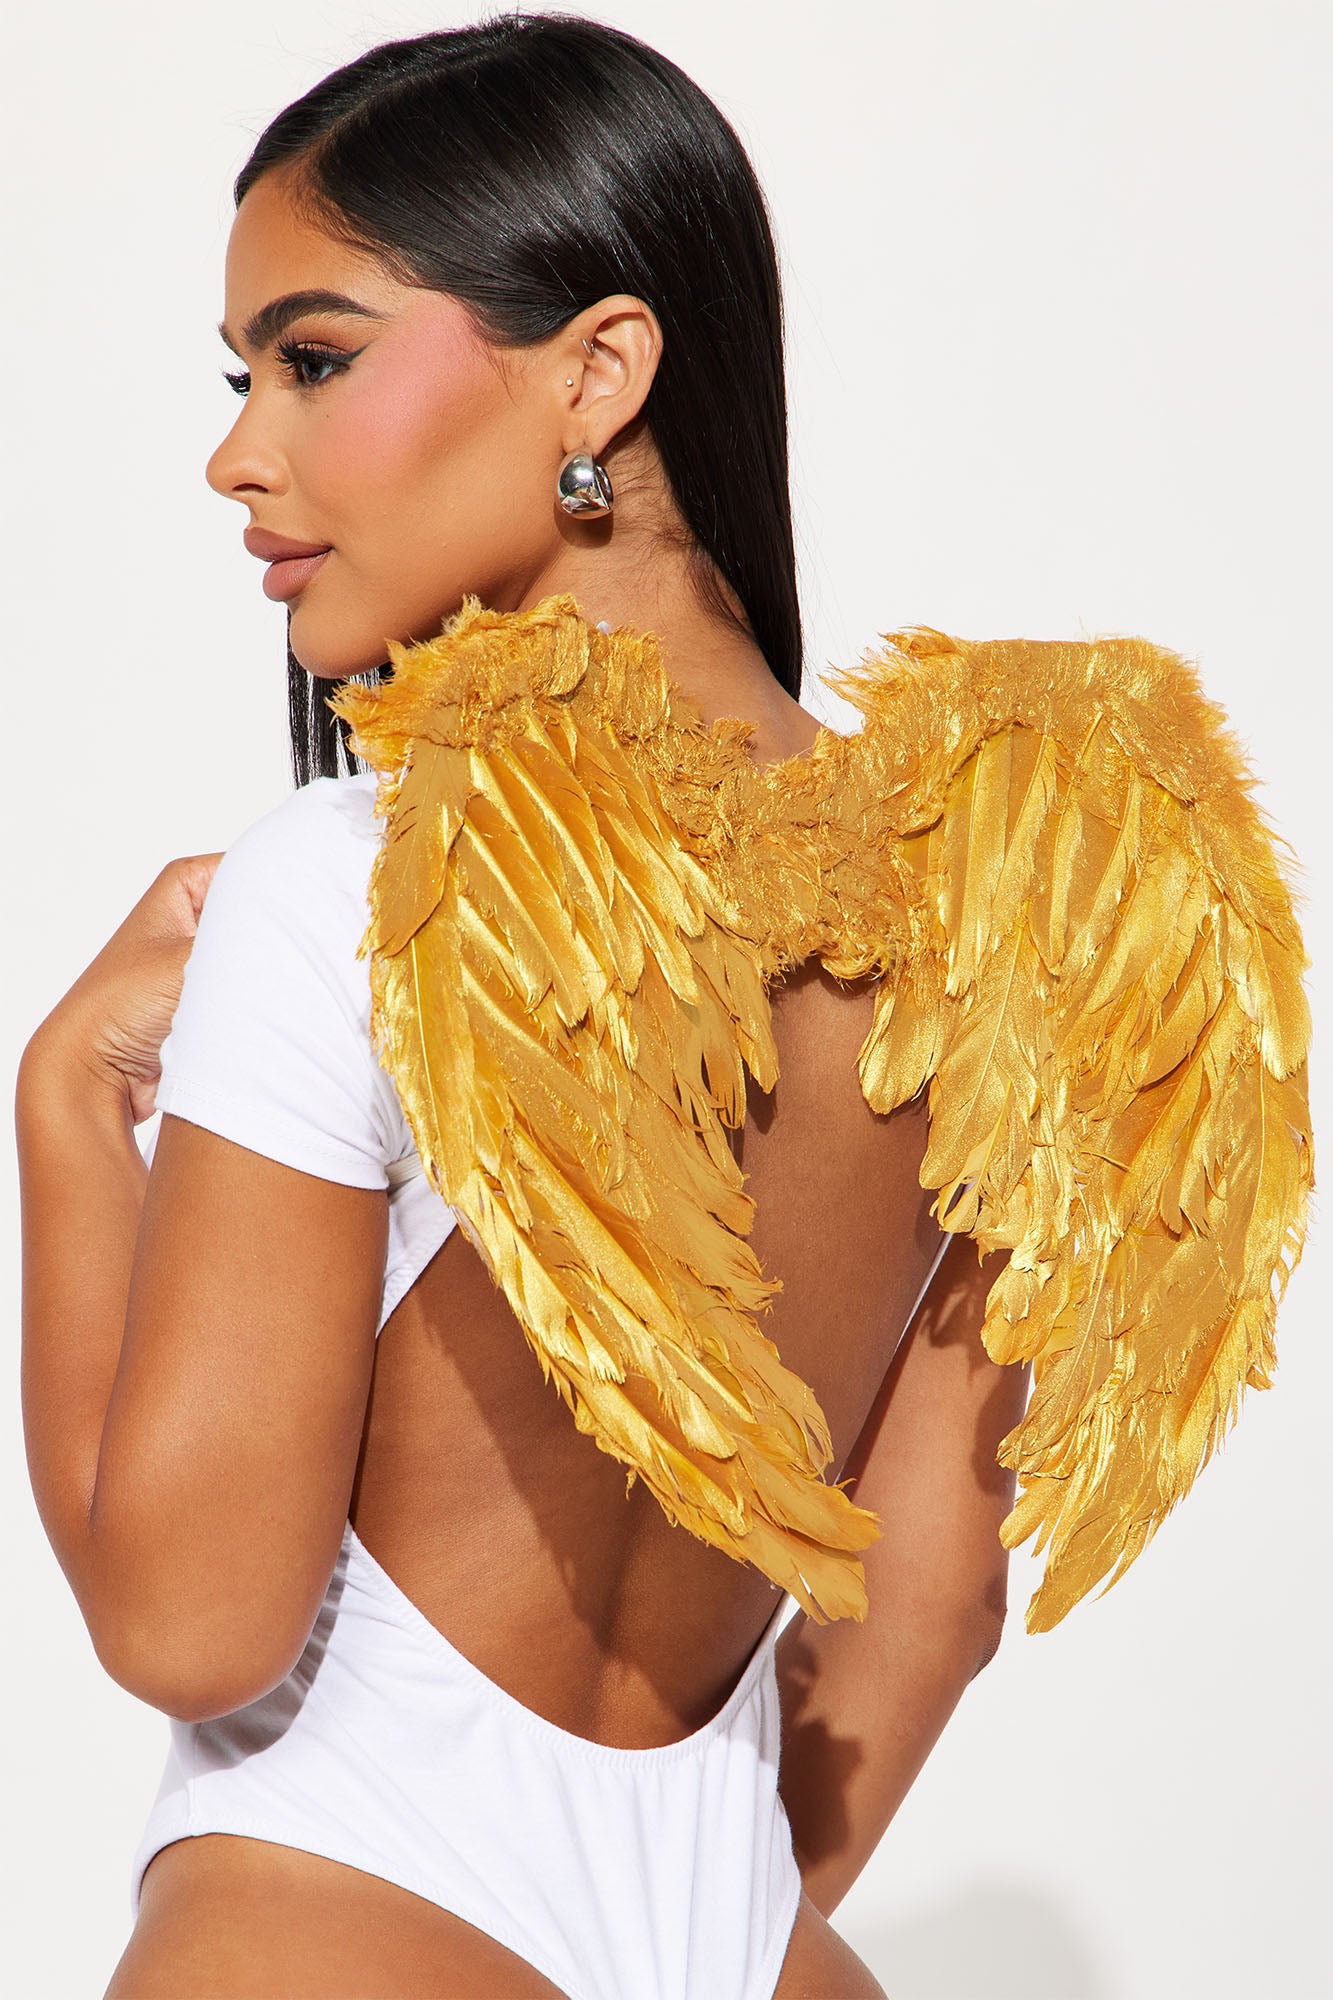 Angel Wings - Small 20x8 / 0.75 / Gold